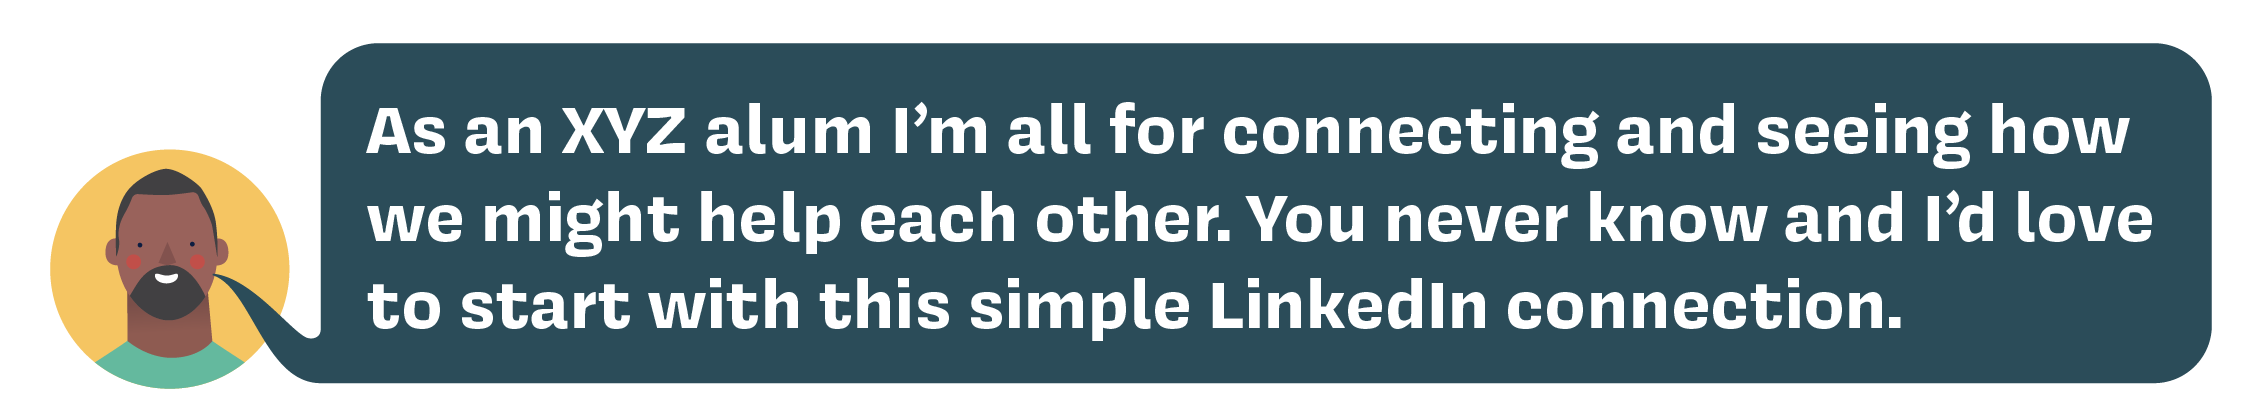 202206-creating-meaningful-connections-on-linkedin-inline_inline-linkedin-msg-02